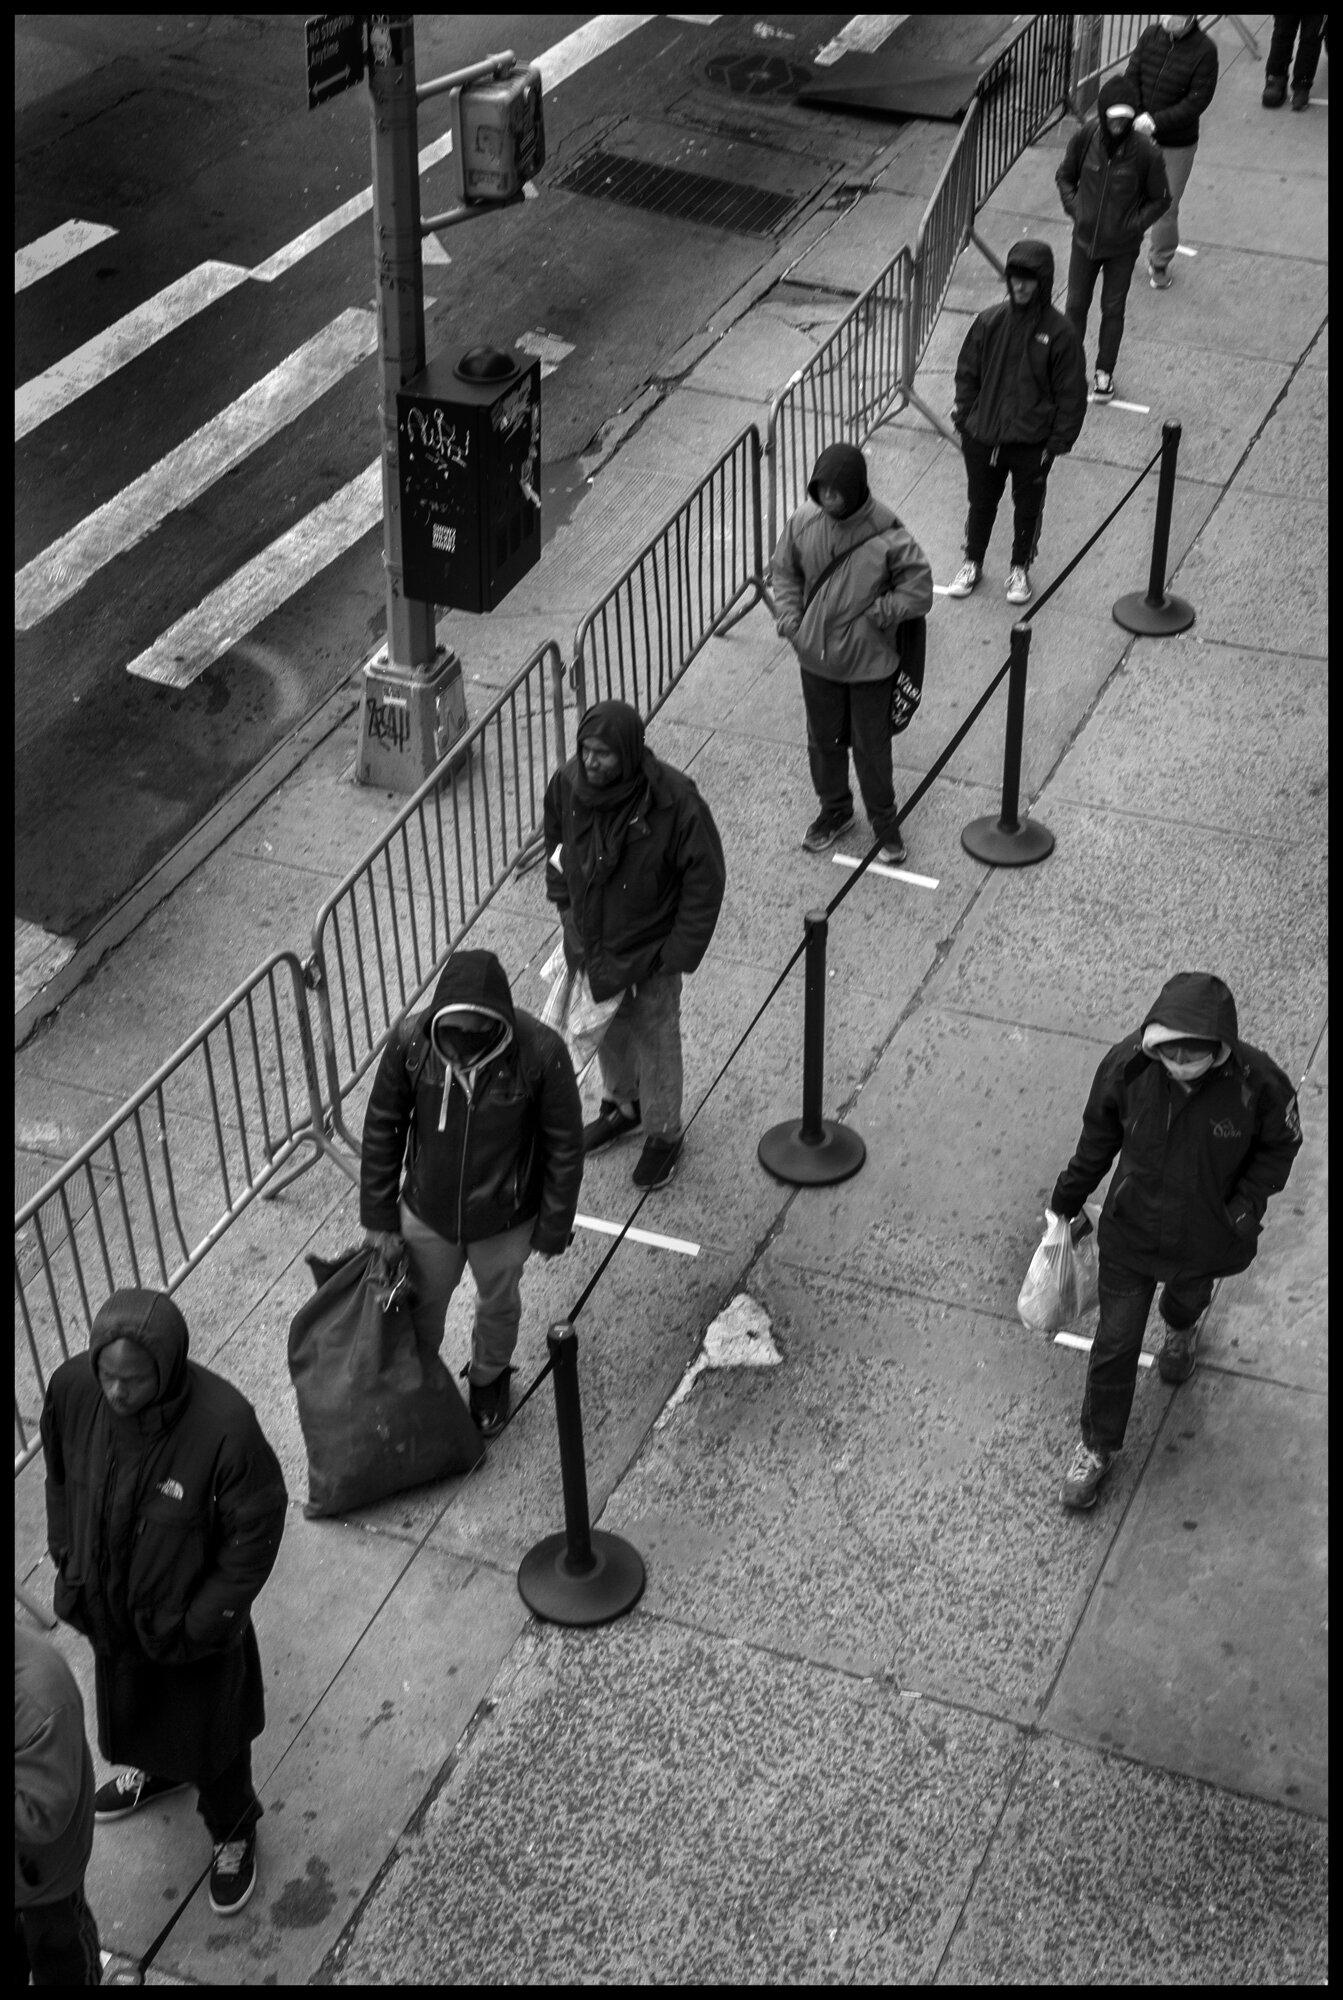  Hundreds of people, homeless or vulnerable without food during this time of the coronavirus crisis, wait outside in the cold, to receive a bag of food at The Bowery Mission in New York City.  April 10, 2020. © Peter Turnley  ID# 18-002 